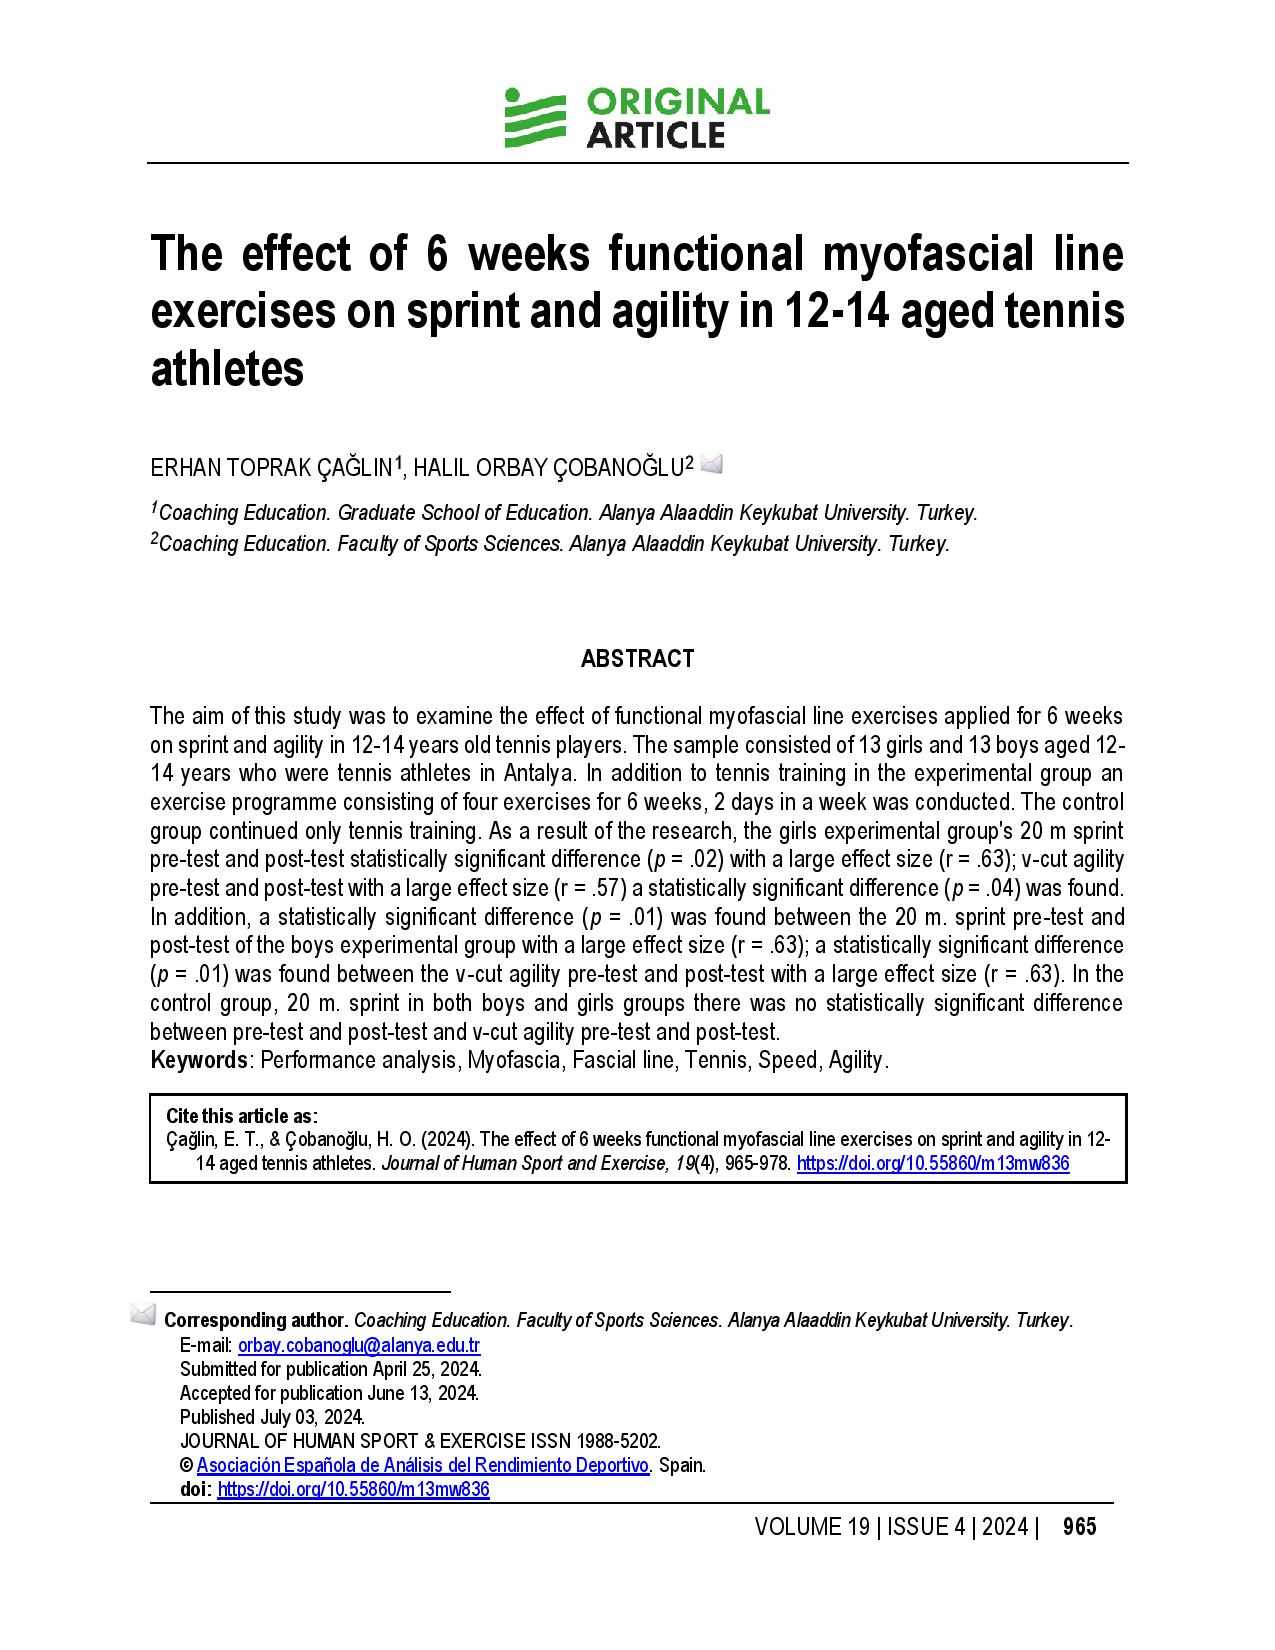 The effect of 6 weeks functional myofascial line exercises on sprint and agility in 12-14 aged tennis athletes